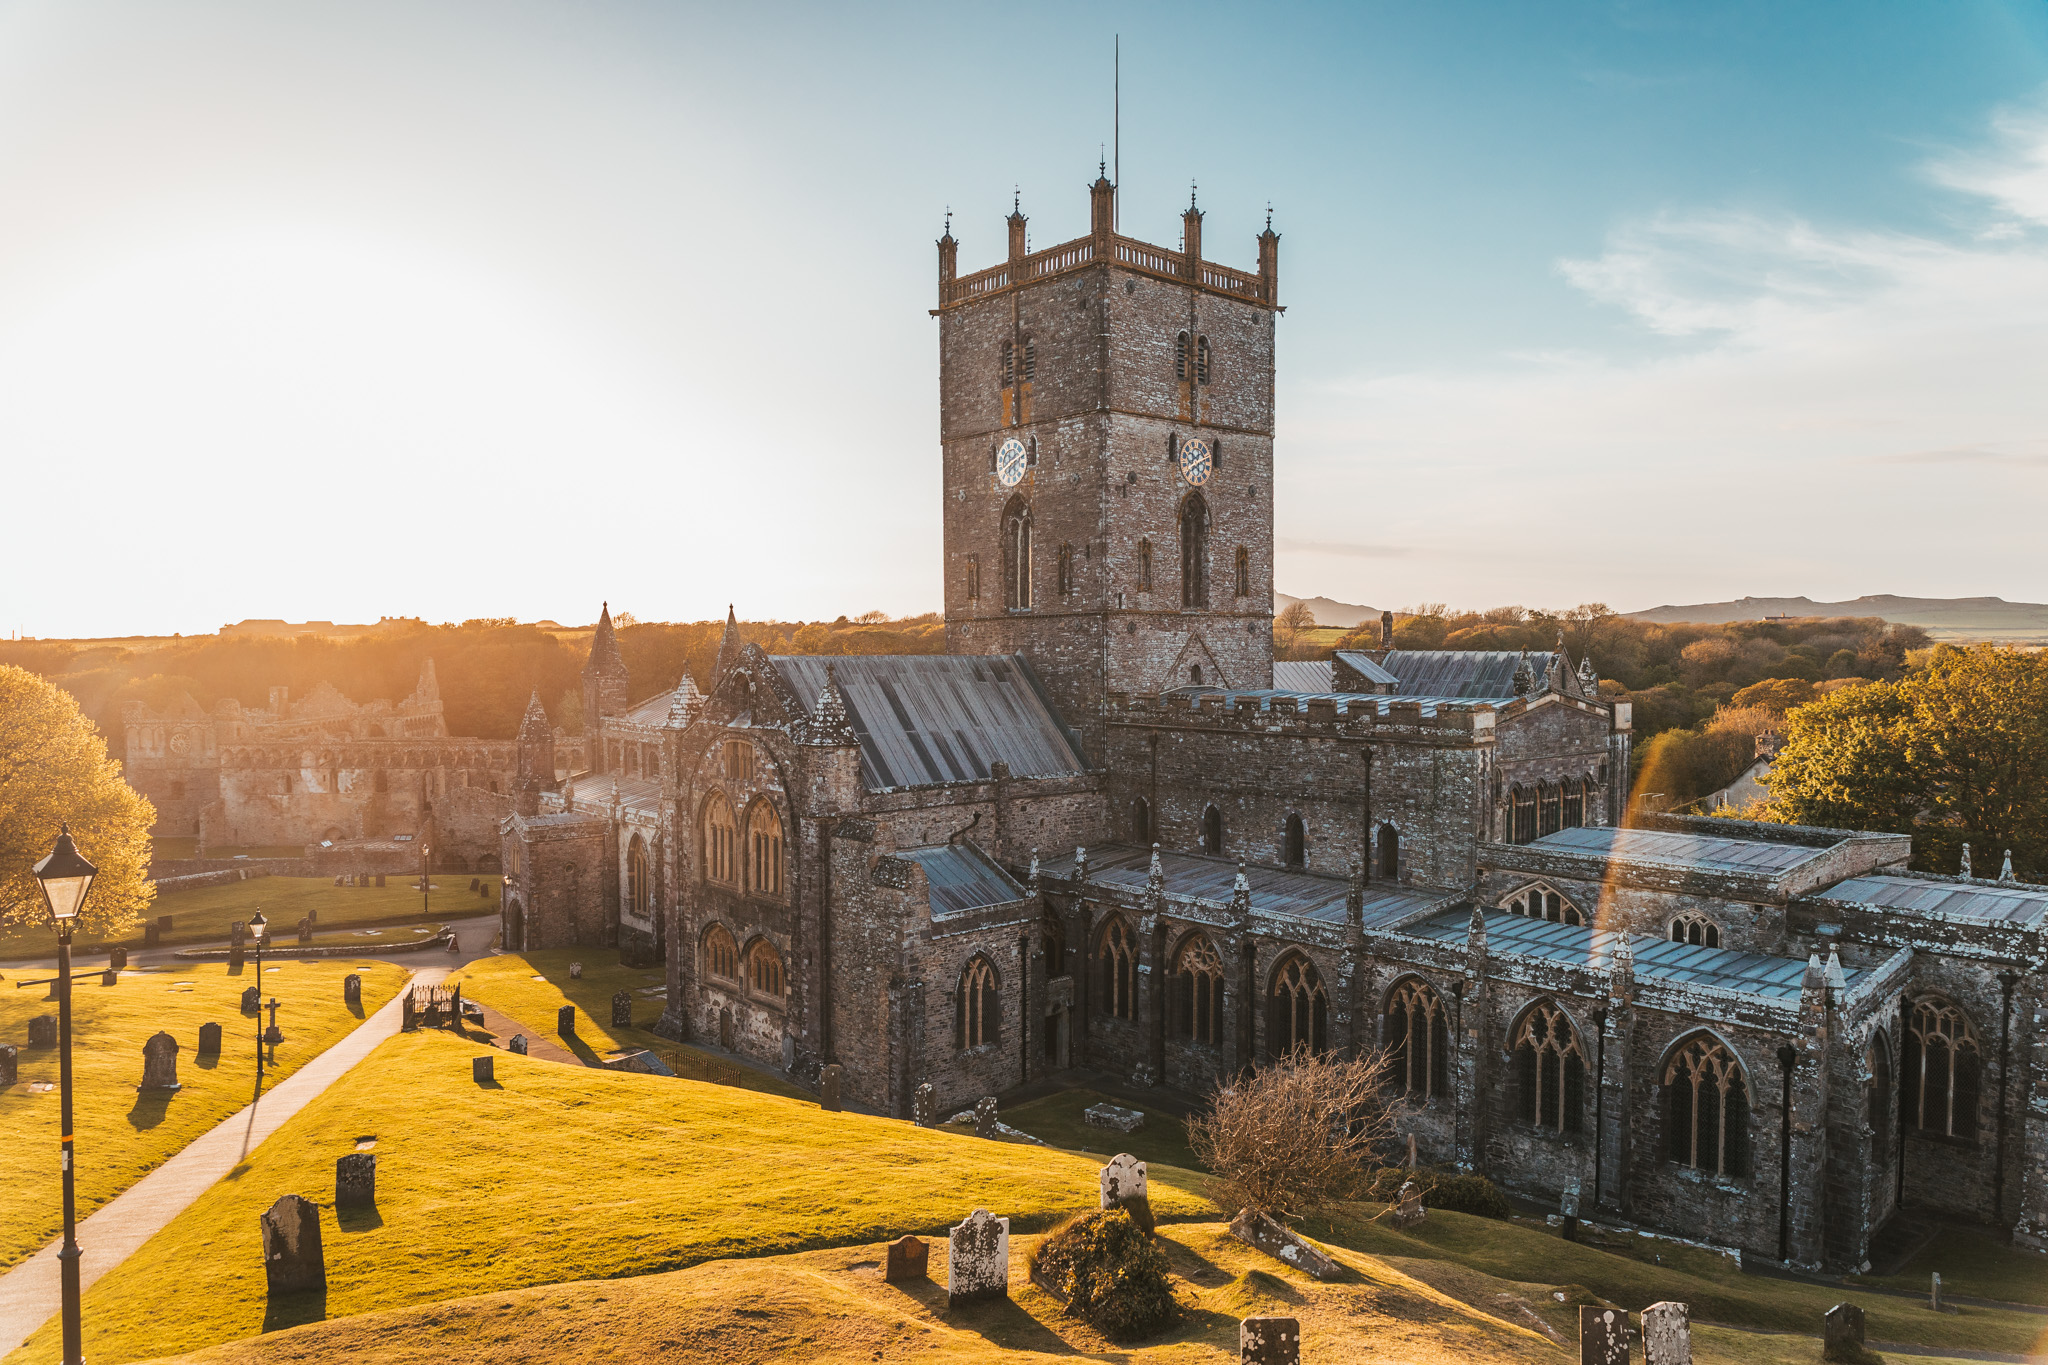 Golden hour at St Davids Cathedral // The Most Beautiful Places to Visit in Wales // #readysetjetset #wales #uk #welsh #travel #photospots #blogpost